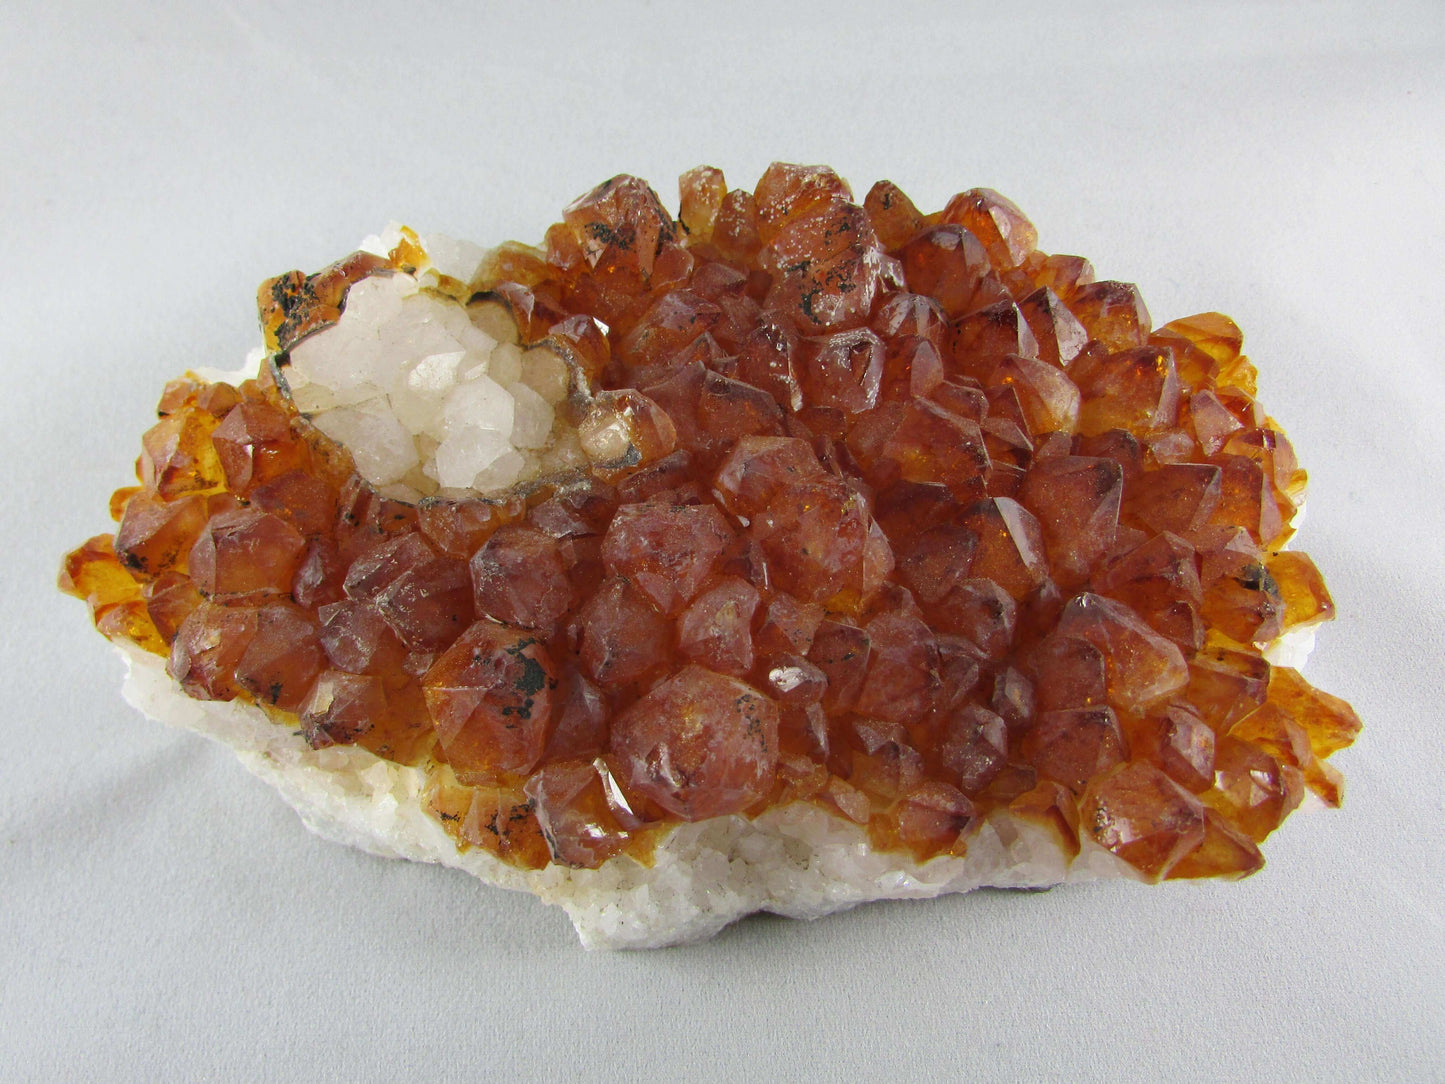 citrine crystal clusters, brazil crystals